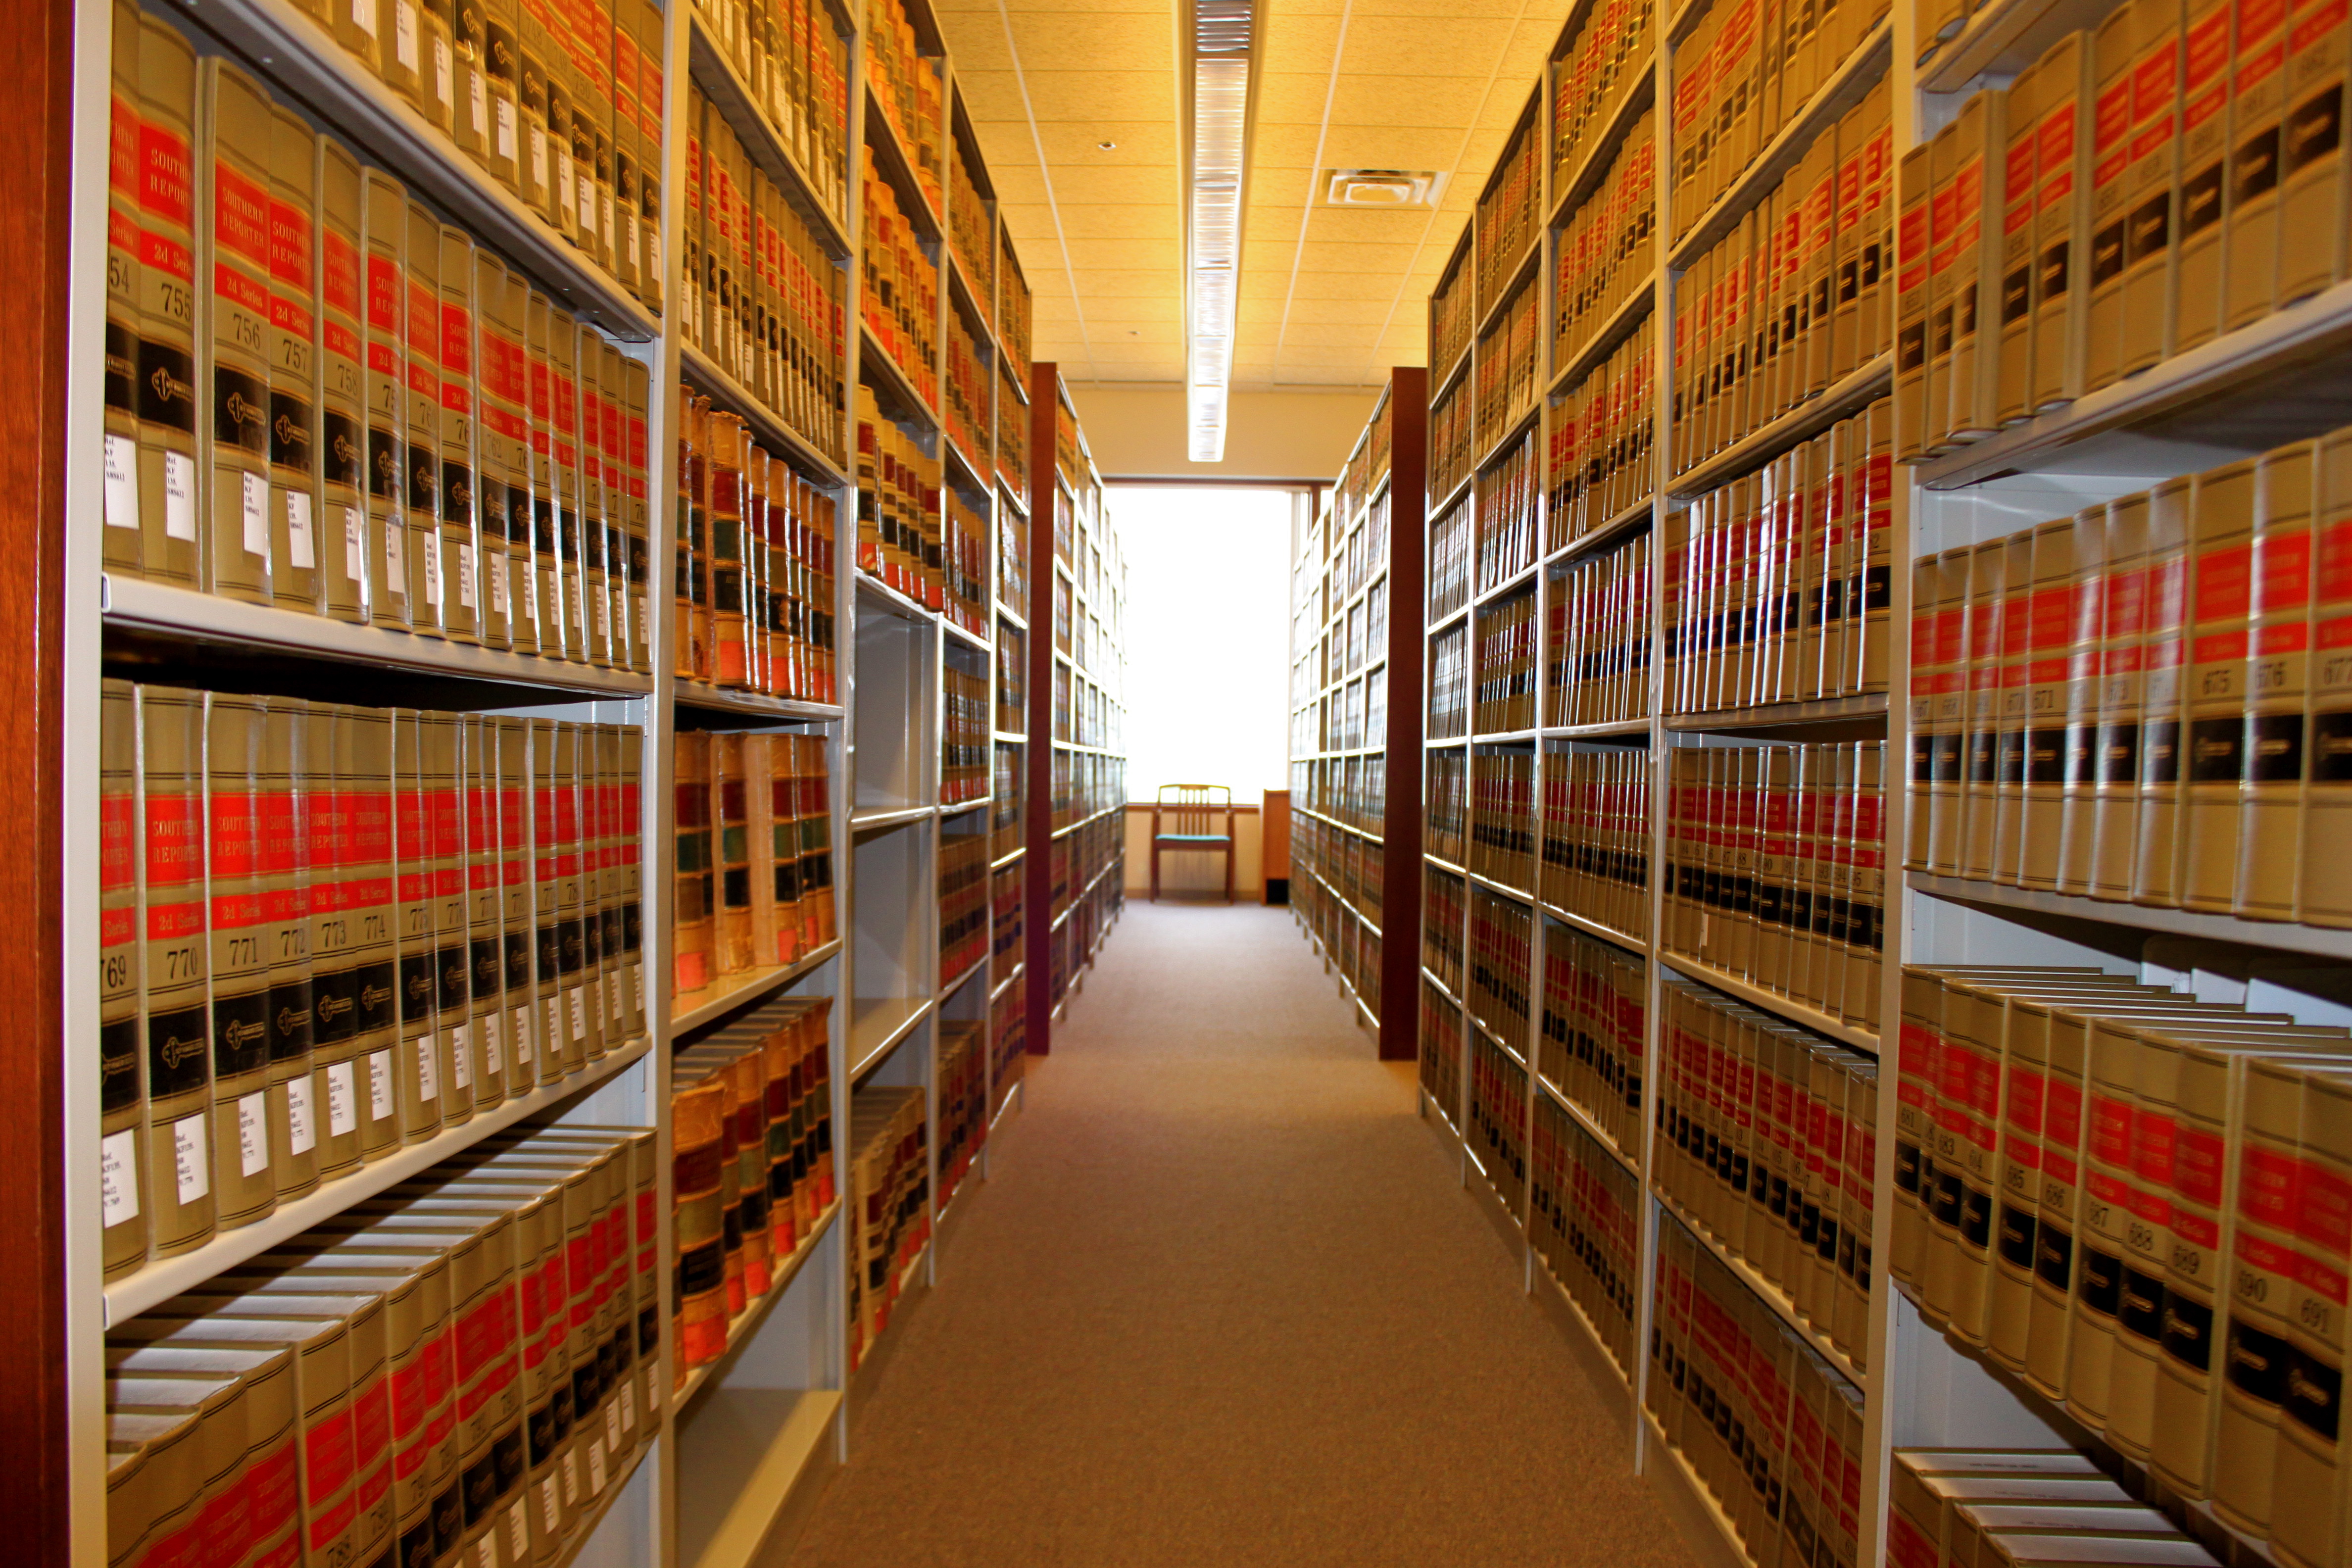 aisle of law books in the library